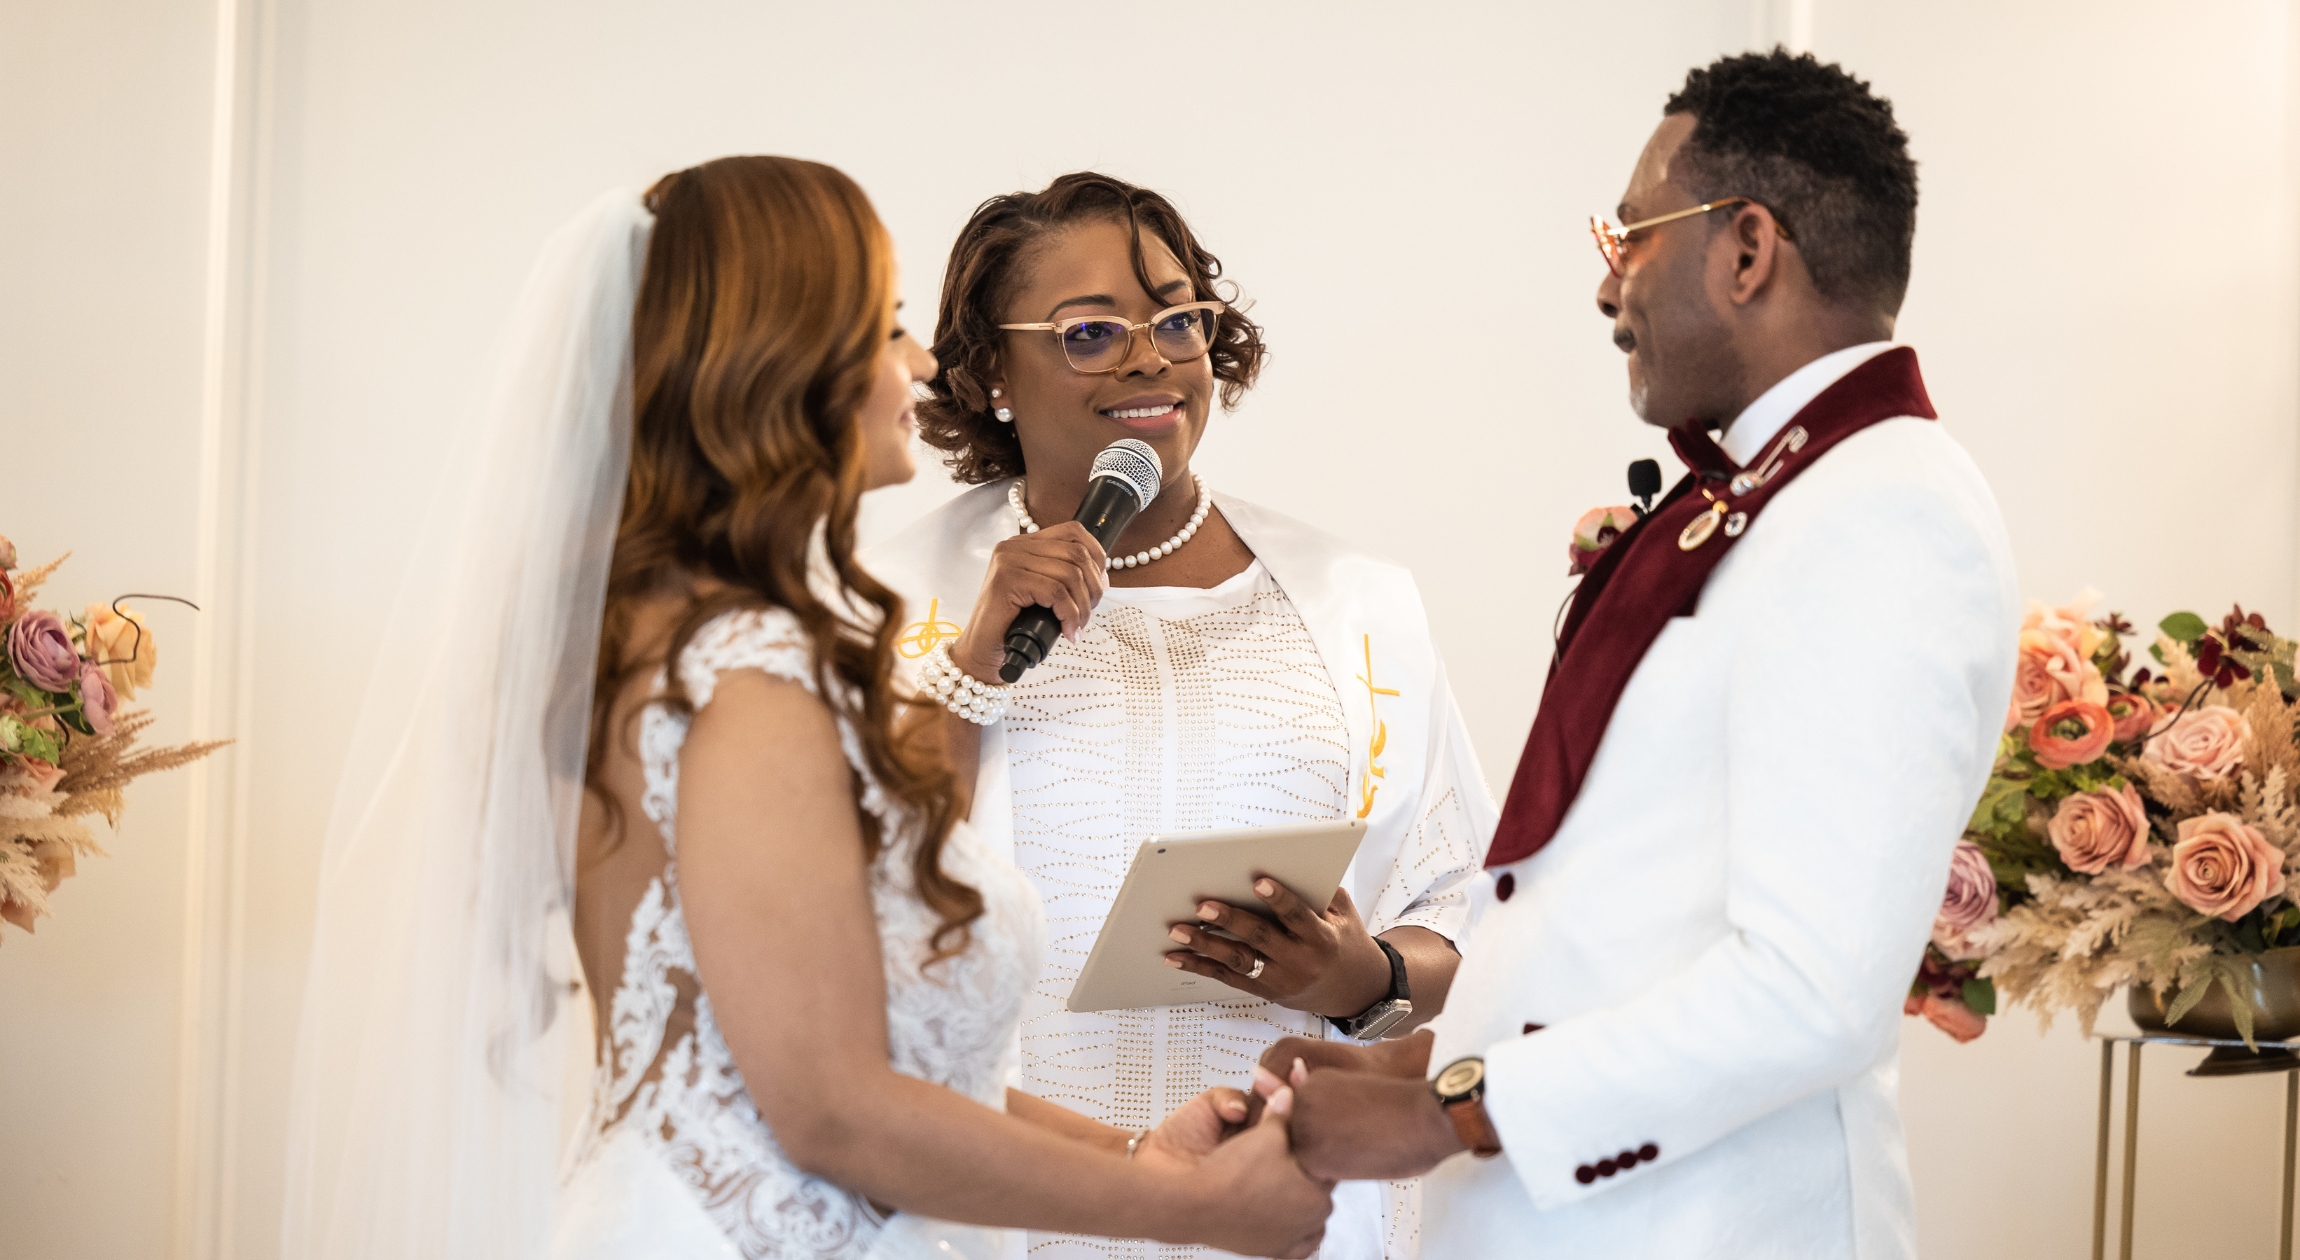 A Black wedding officiant stands between a bride and groom